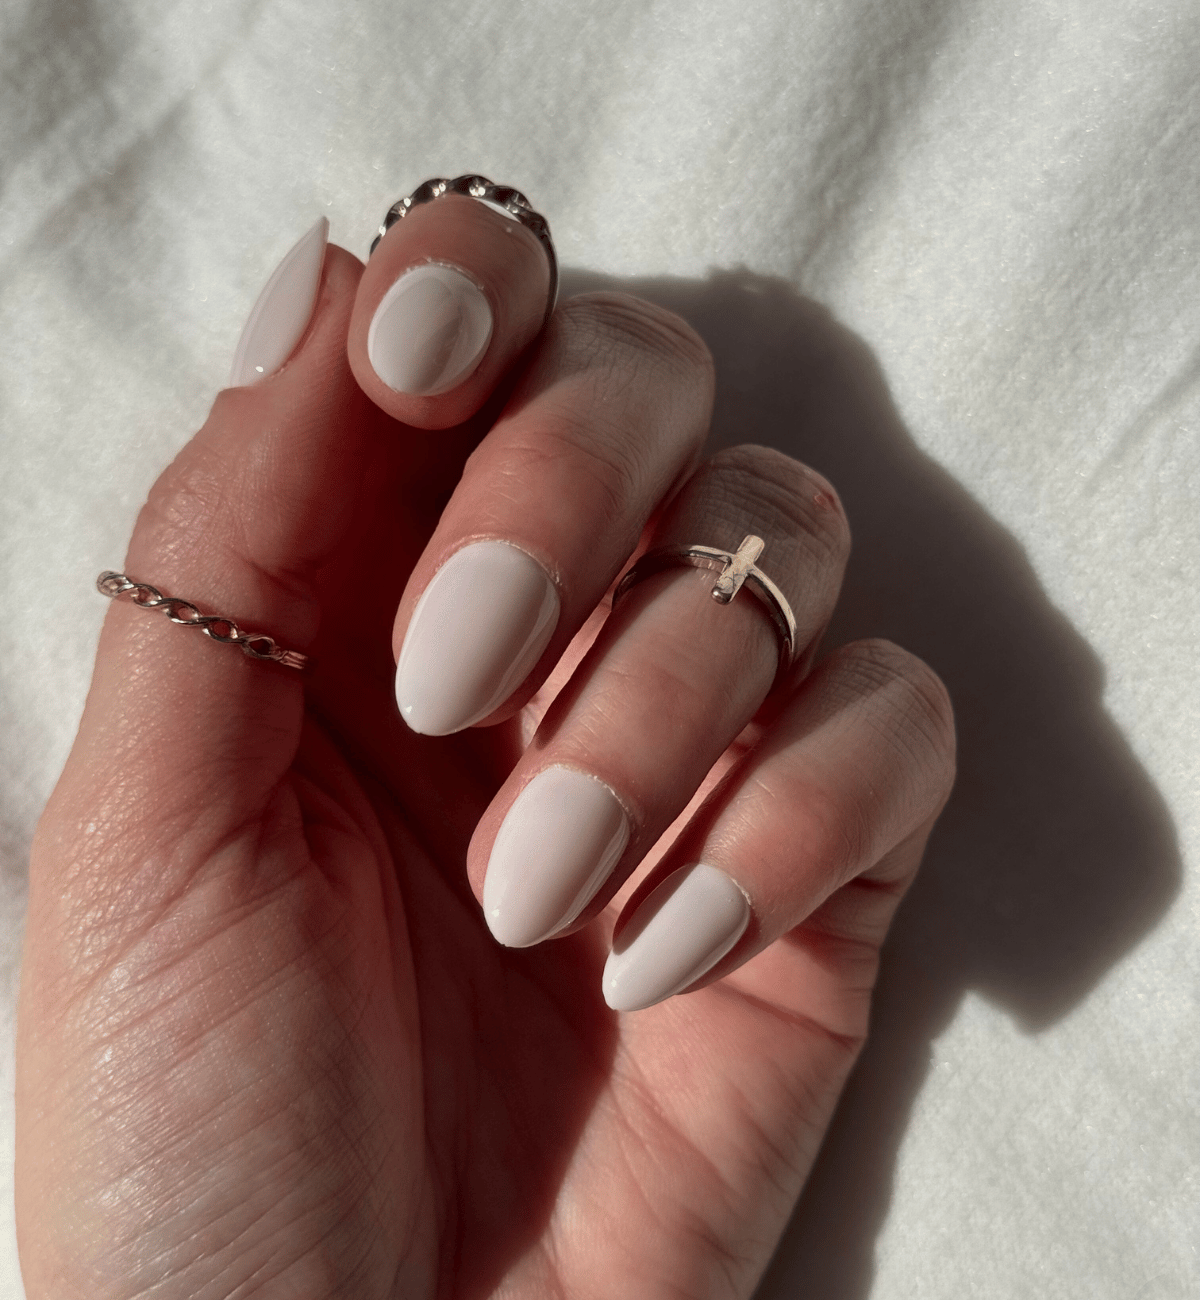 FAUX ONGLES CREAMY AMANDE COURT